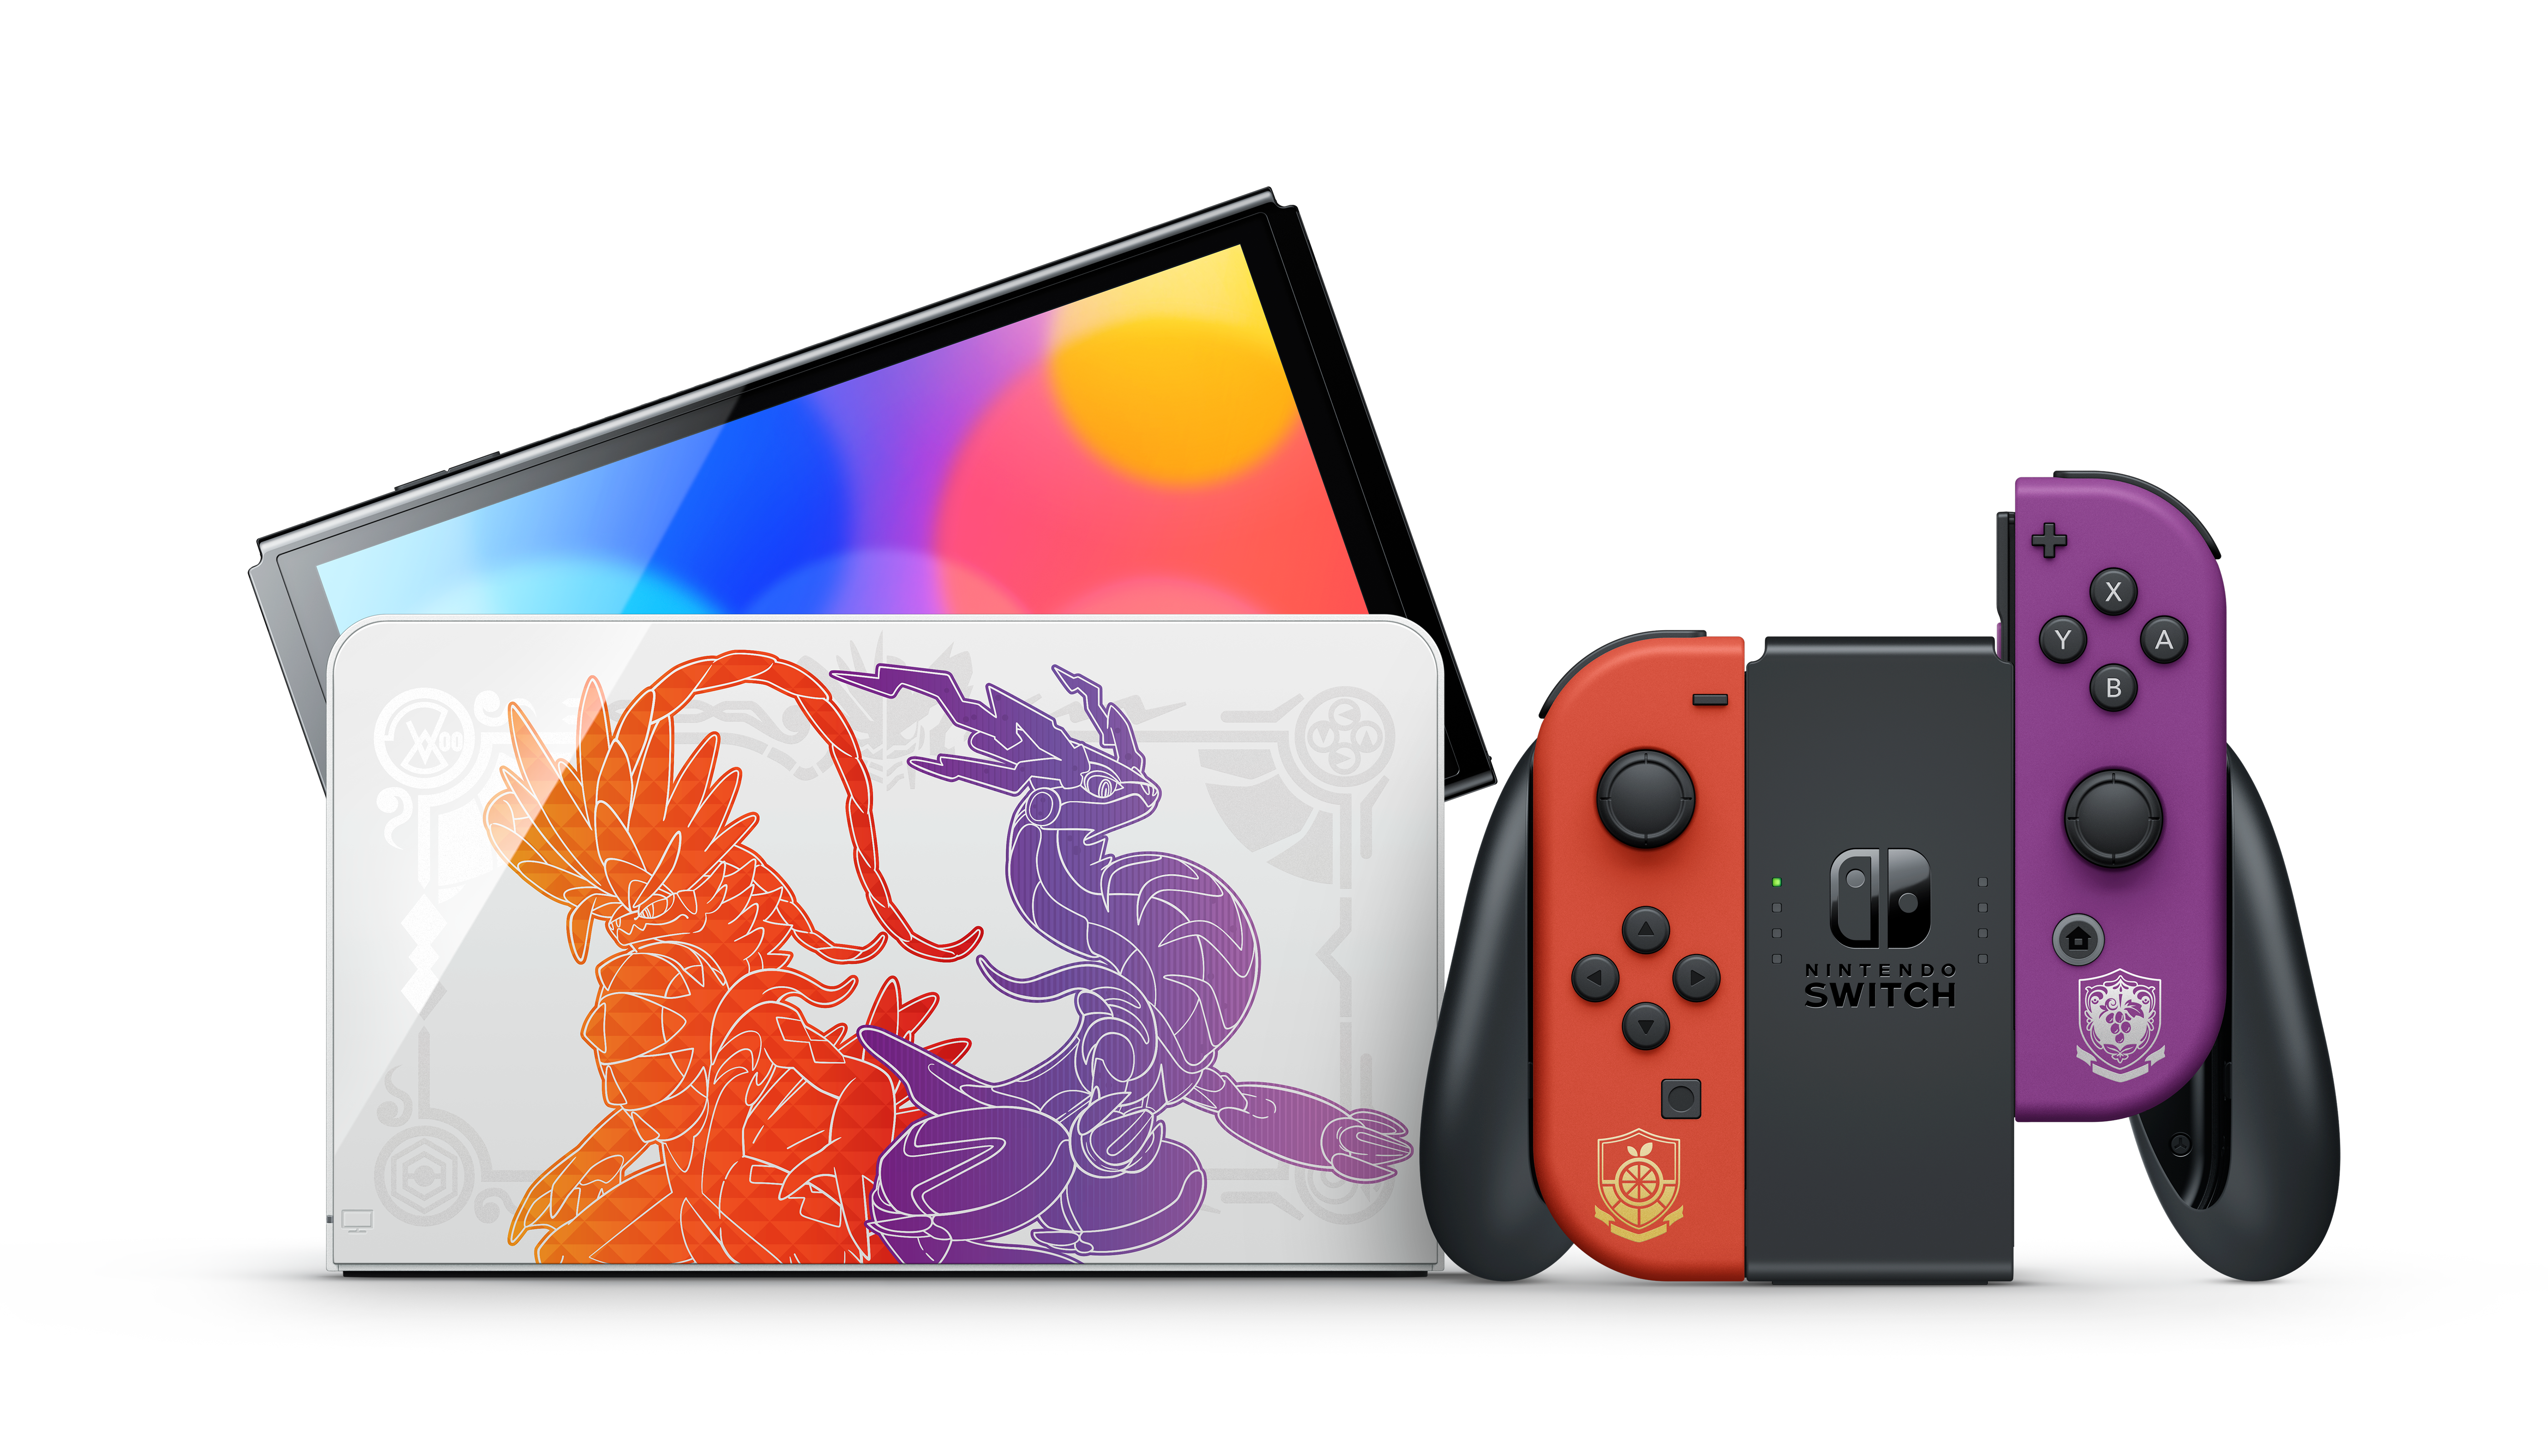 Motivate Light Store Pokémon Scarlet and Violet getting special edition OLED Nintendo Switch -  Polygon